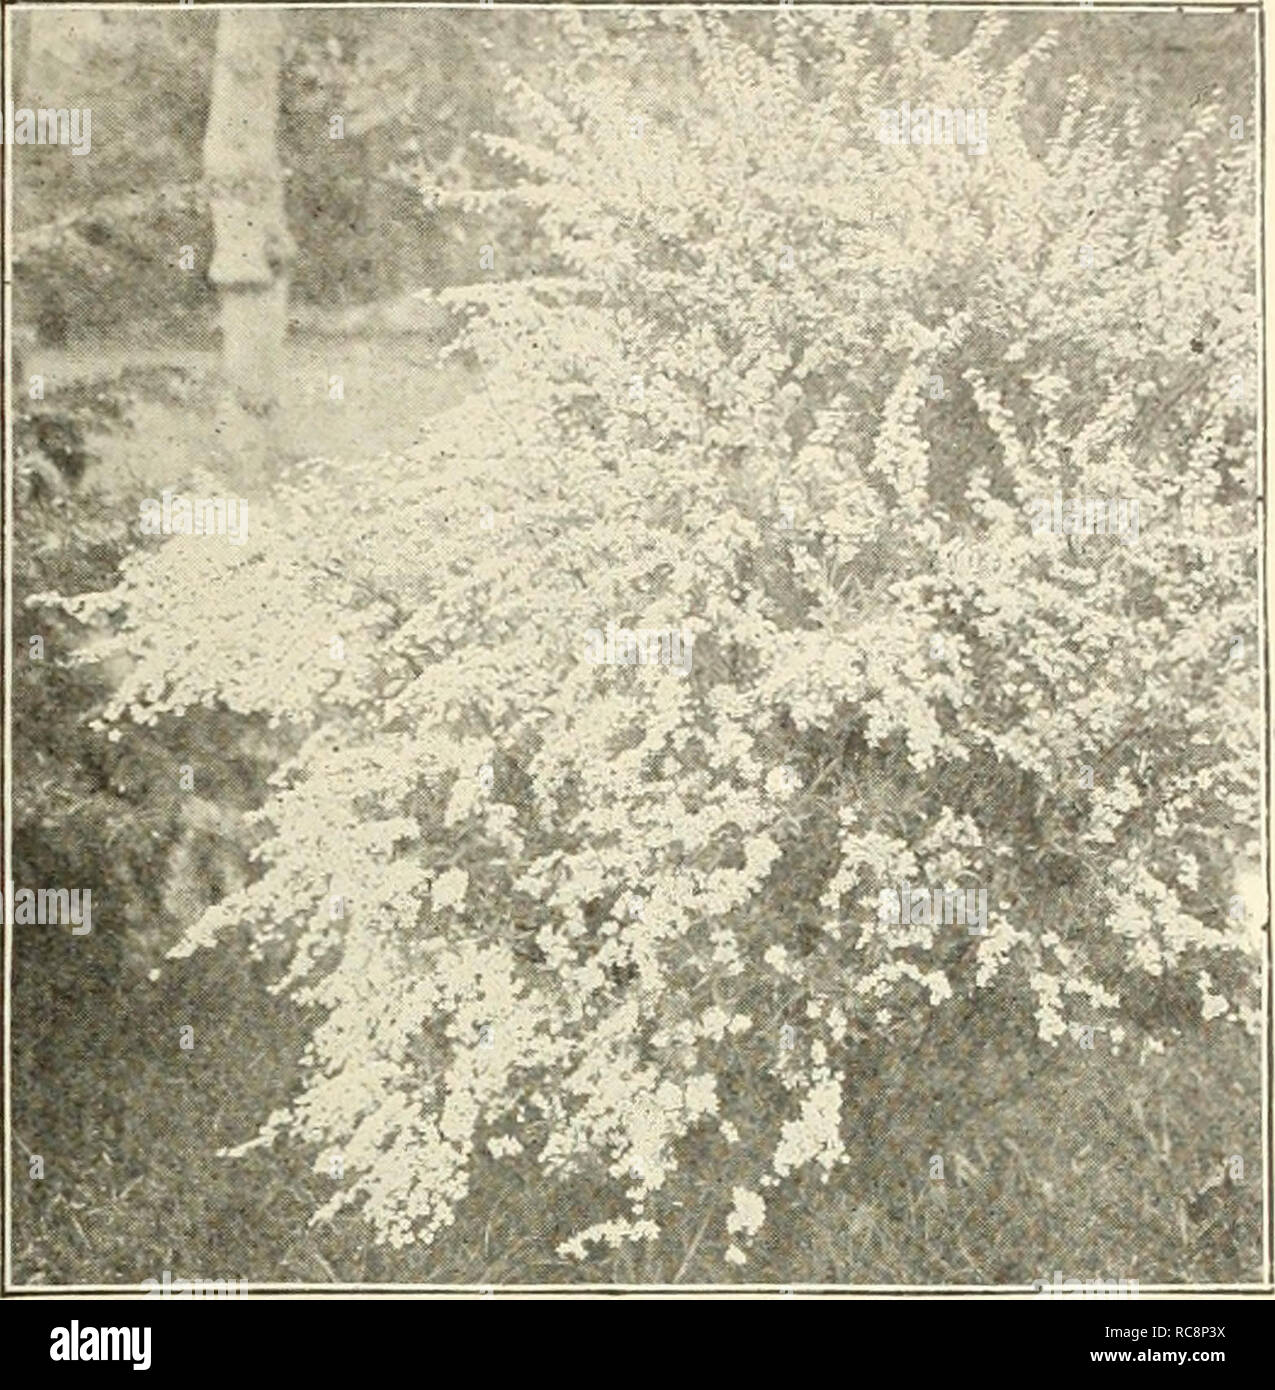 . Dreer's garden book 1925. Seeds Catalogs; Nursery stock Catalogs; Gardening Equipment and supplies Catalogs; Flowers Seeds Catalogs; Vegetables Seeds Catalogs; Fruit Seeds Catalogs. (flEHRyAJKEE^ CHOICE HARDY SHRUBS &gt;HiiiamHRR 201 Ligustrum Ibota Regelianum. A handsome Japanese Privet, with spreading branches and dark green foliage, con- trasting well with the fragrant racemes of white flowers in sum- mer, a splendid shrub to grow as an isolated specimen or for an informal hedge. 60 cts. each. — Ovalifolium Aureum (Golden-leaved Privet). A beautiful golden variegated form and very effect Stock Photo